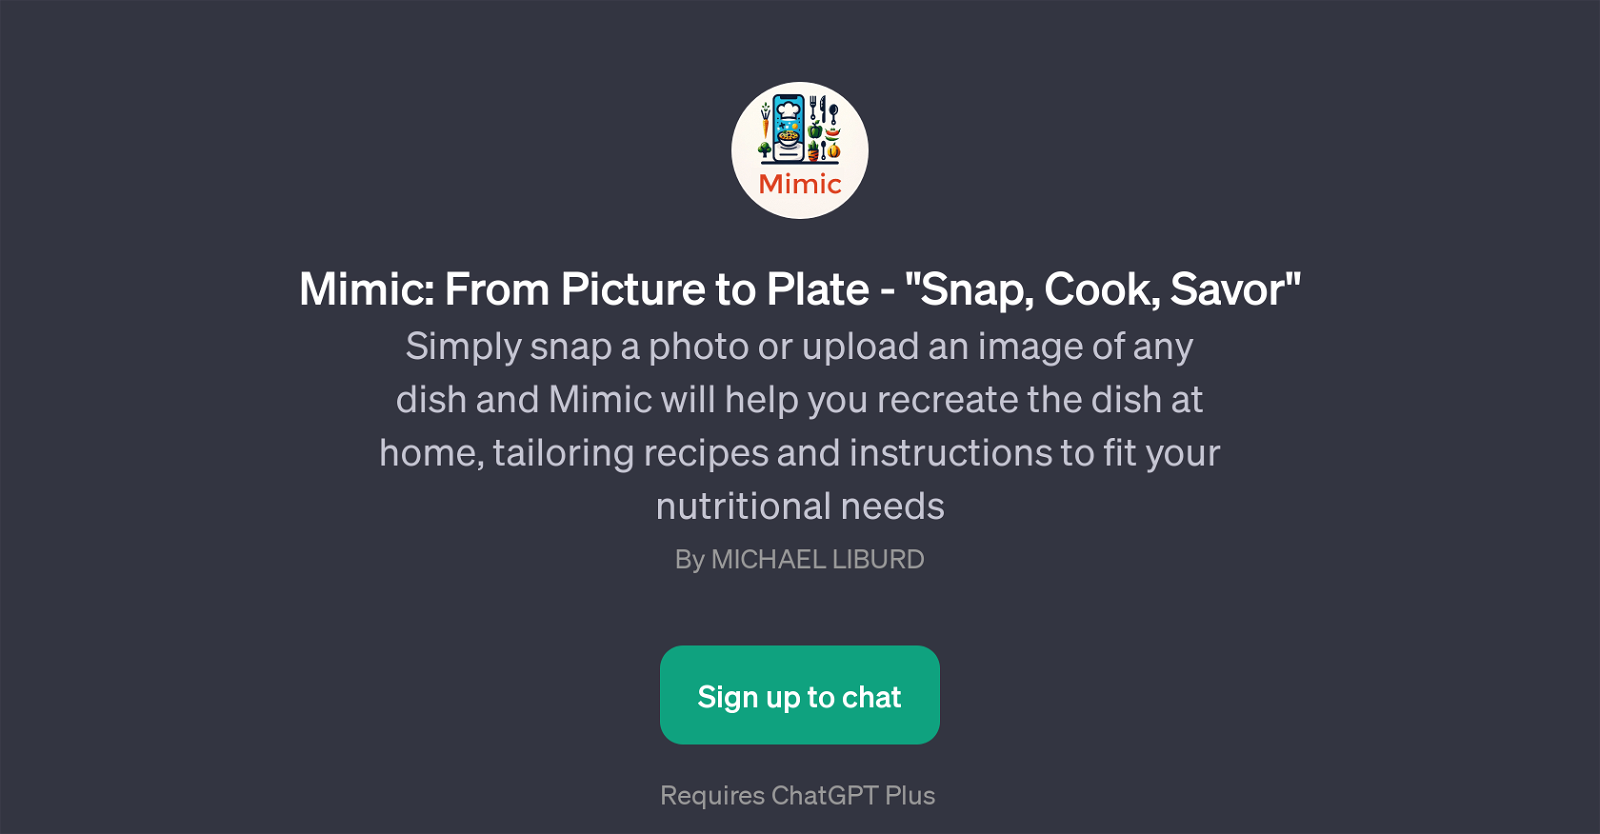 Mimic: From Picture to Plate website